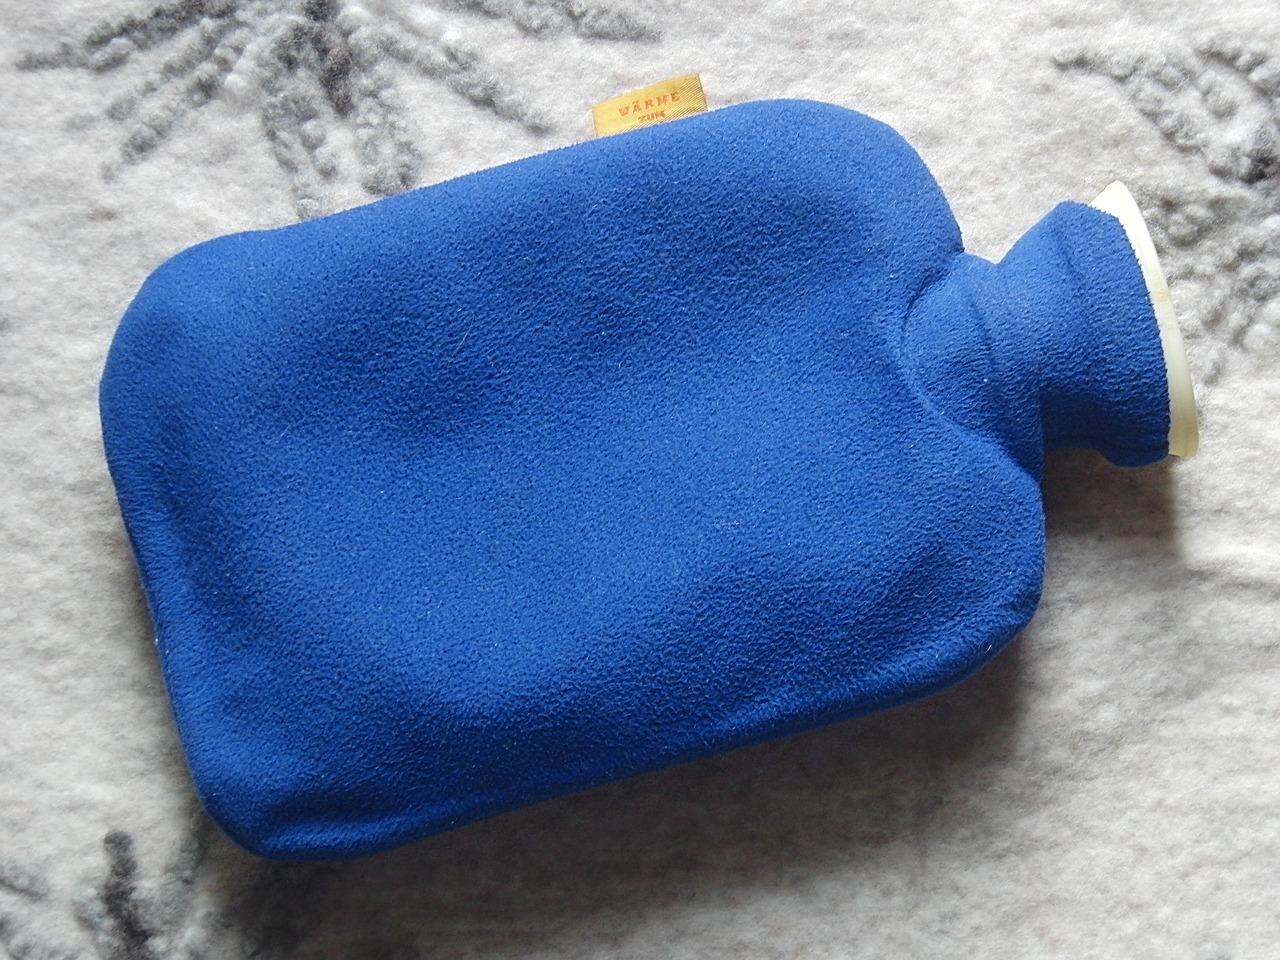 hot water bottle warm bless you free photo